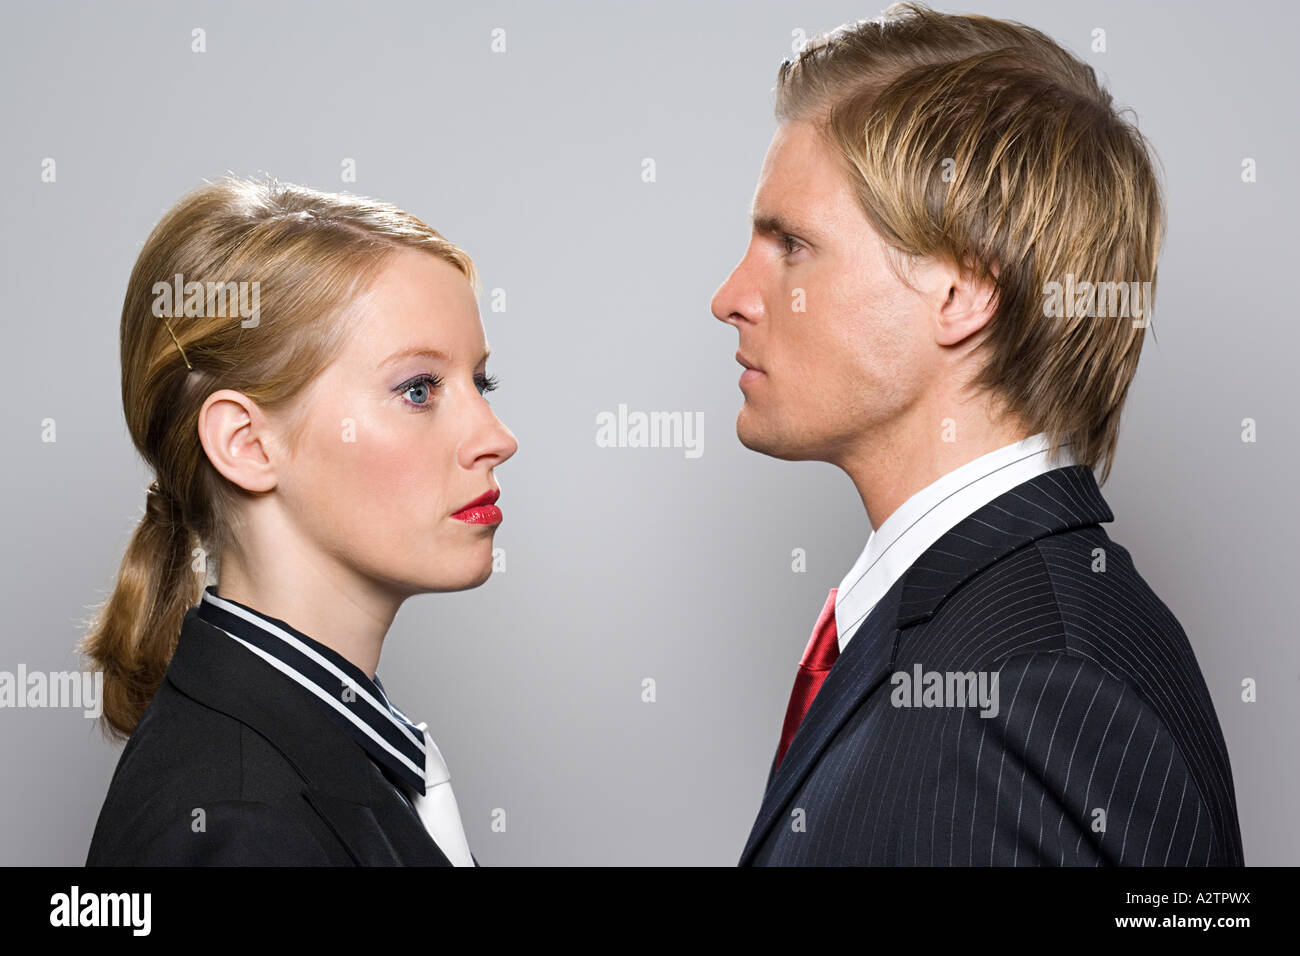 Two colleagues Stock Photo